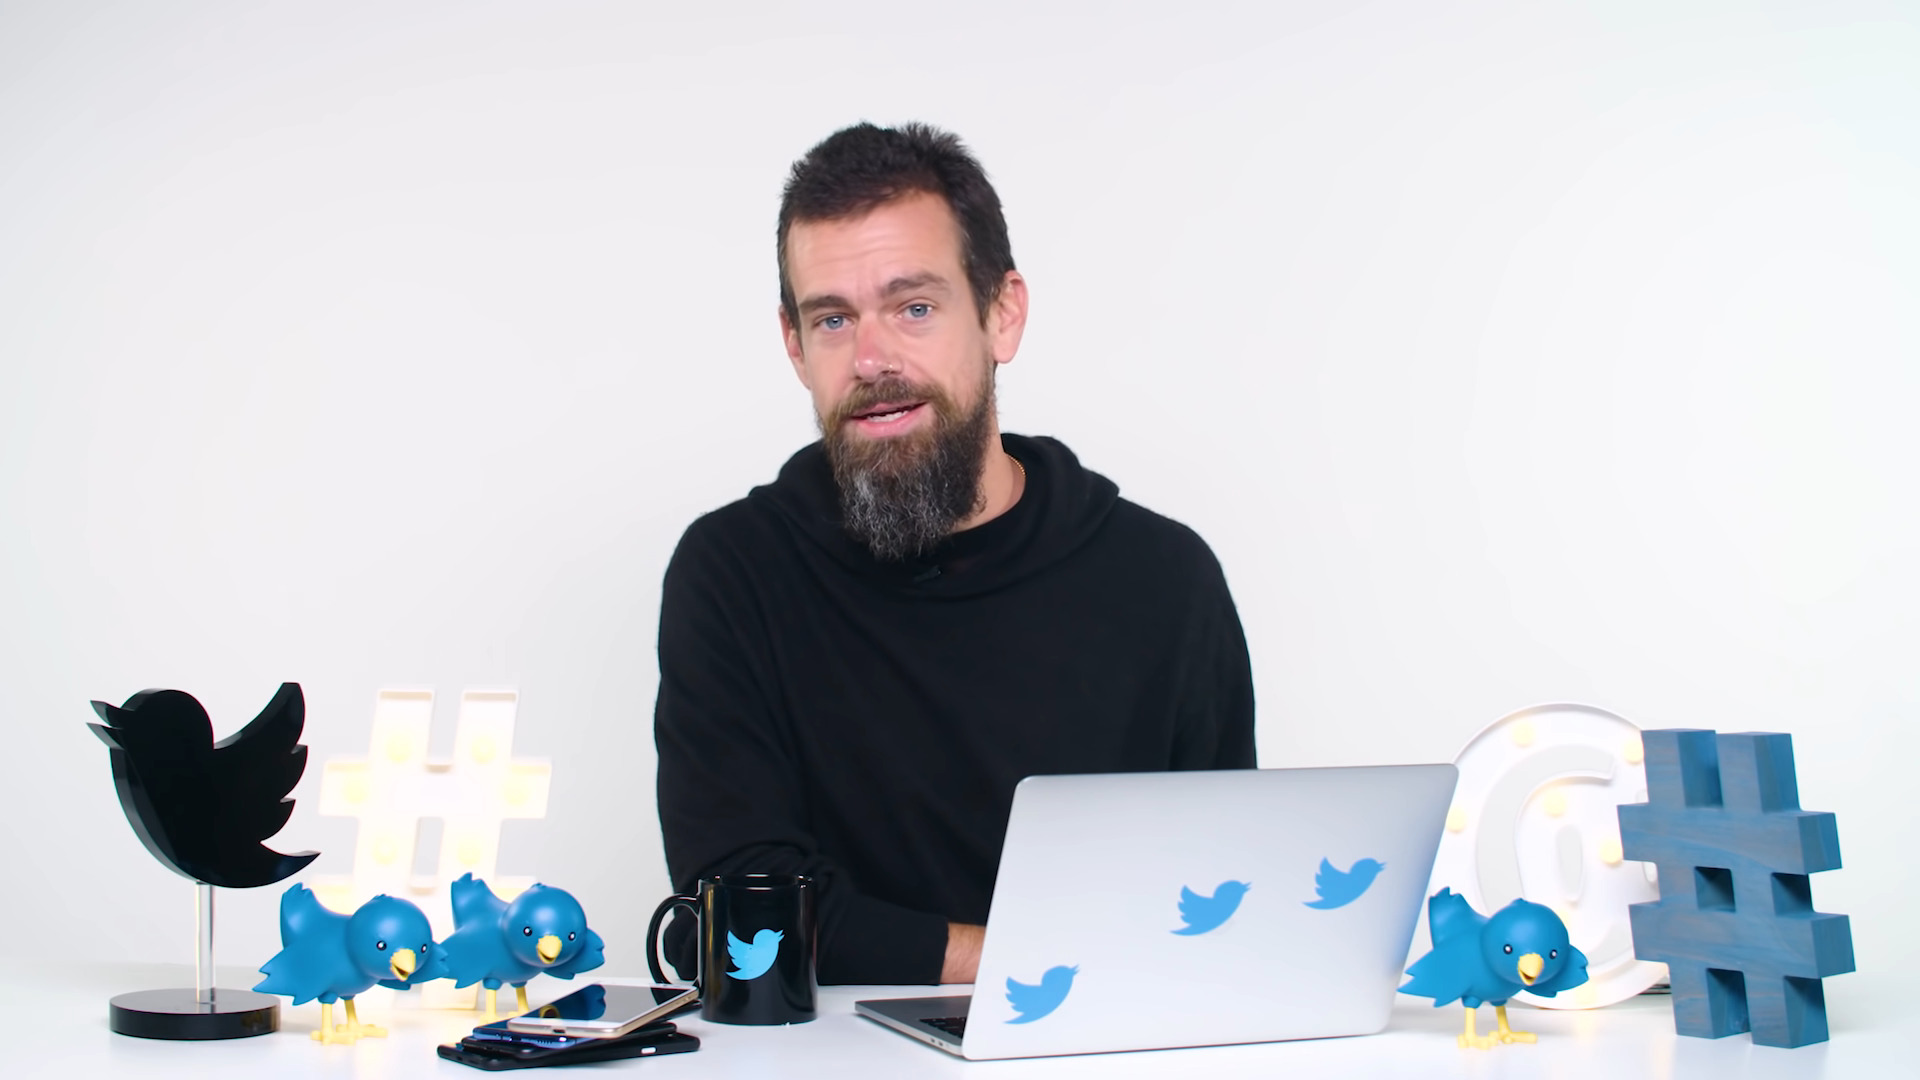 Twitter Co-Founder Jack Dorsey Answers Twitter Questions From Twitter via Wired YouTube